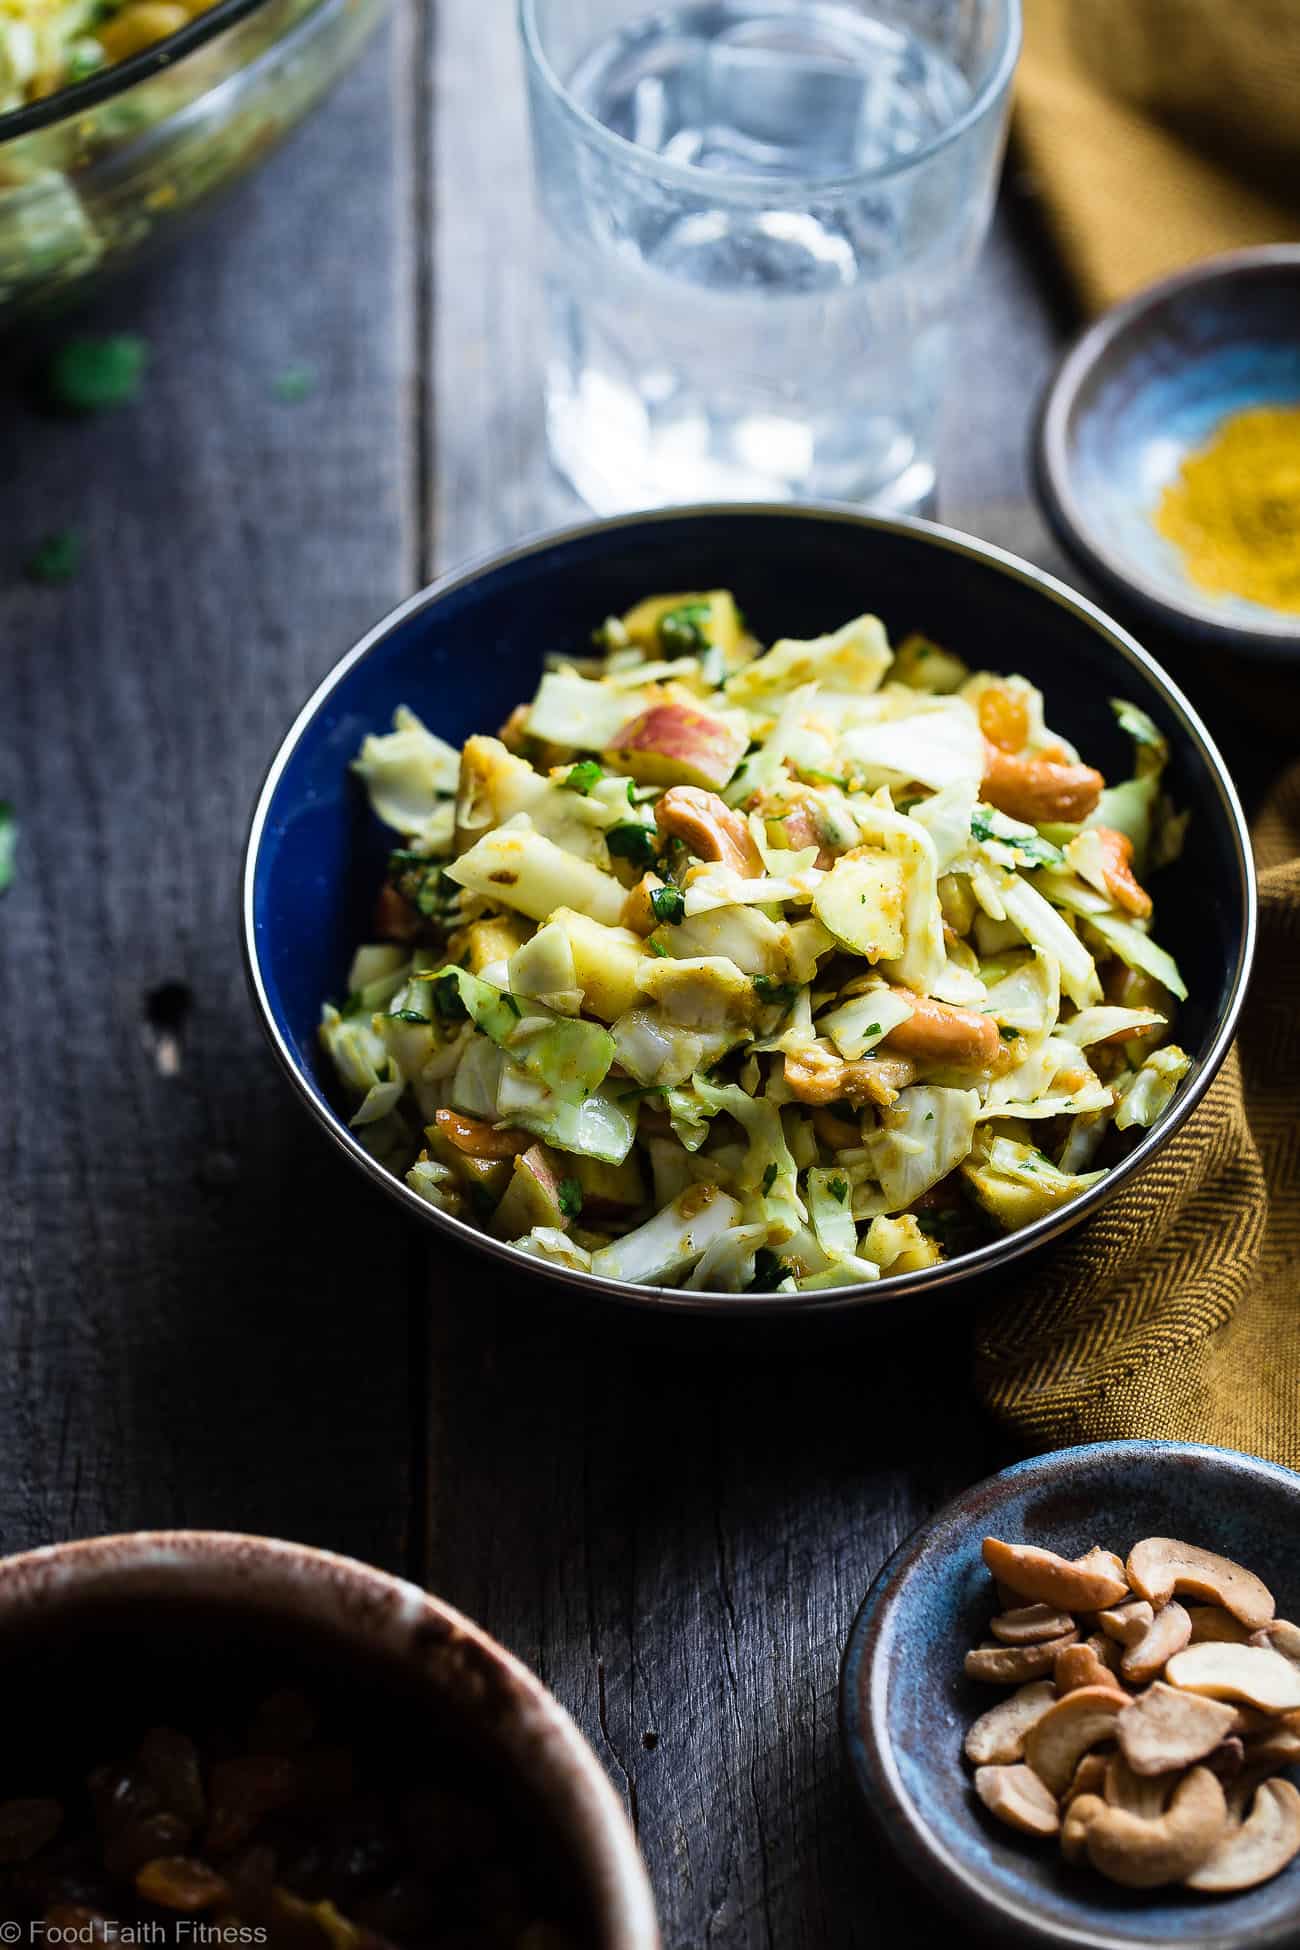 Curry Cashew Shredded Cabbage Salad with Apples - A sugar and gluten free healthy salads with cabbage that is mixed with a creamy curry dressing and crunchy cashews! A healthy, paleo and whole30 side dish that everyone will love! | Foodfaithfitness.com | @FoodFaithFit